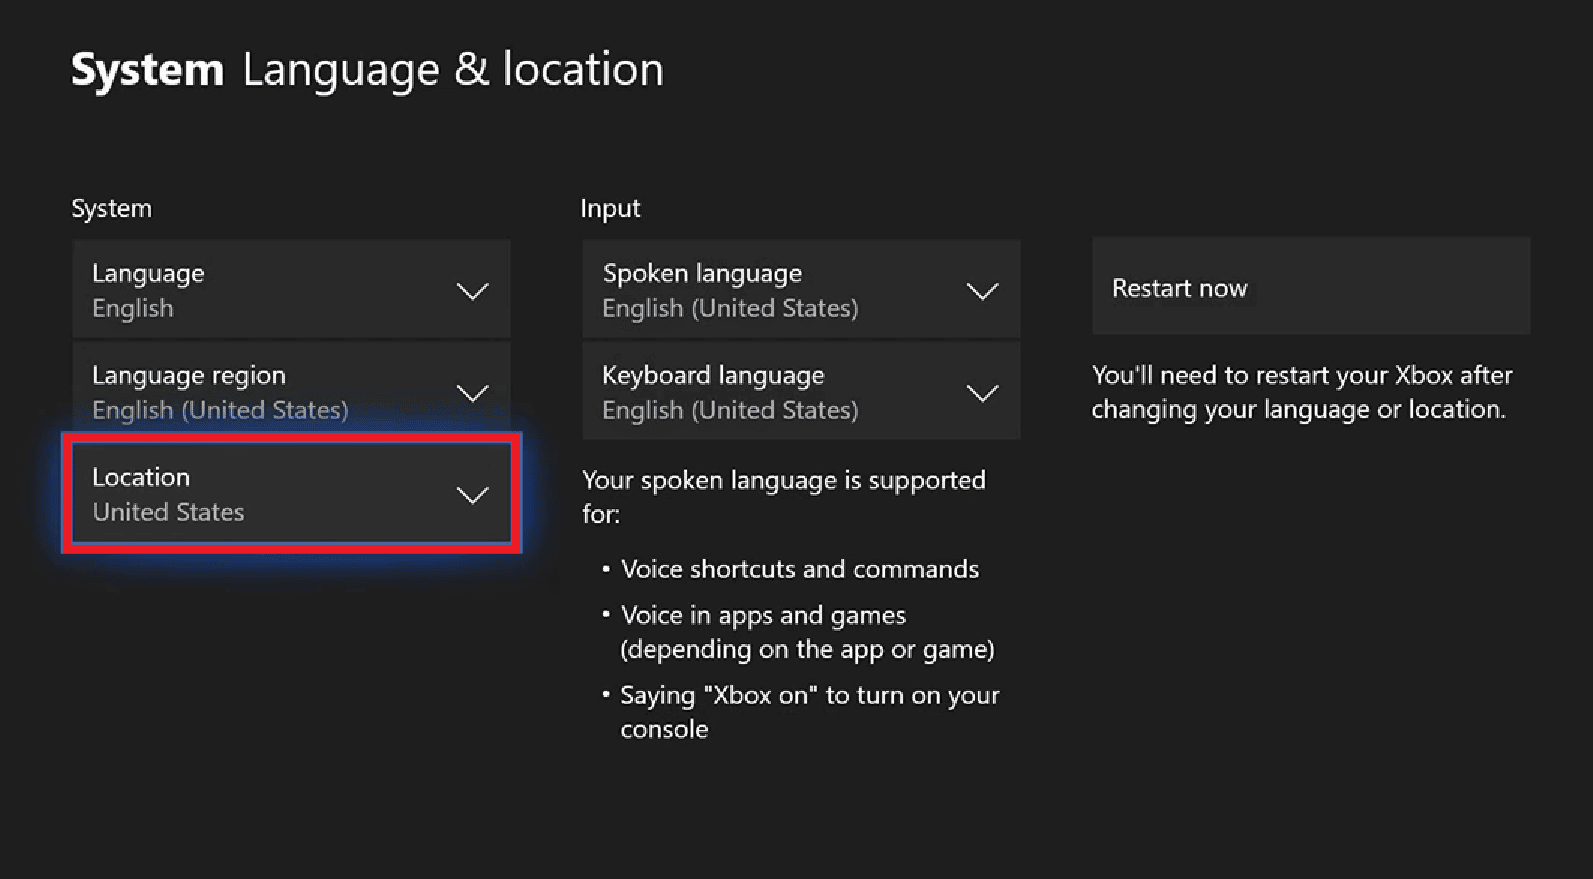 Select the Location option